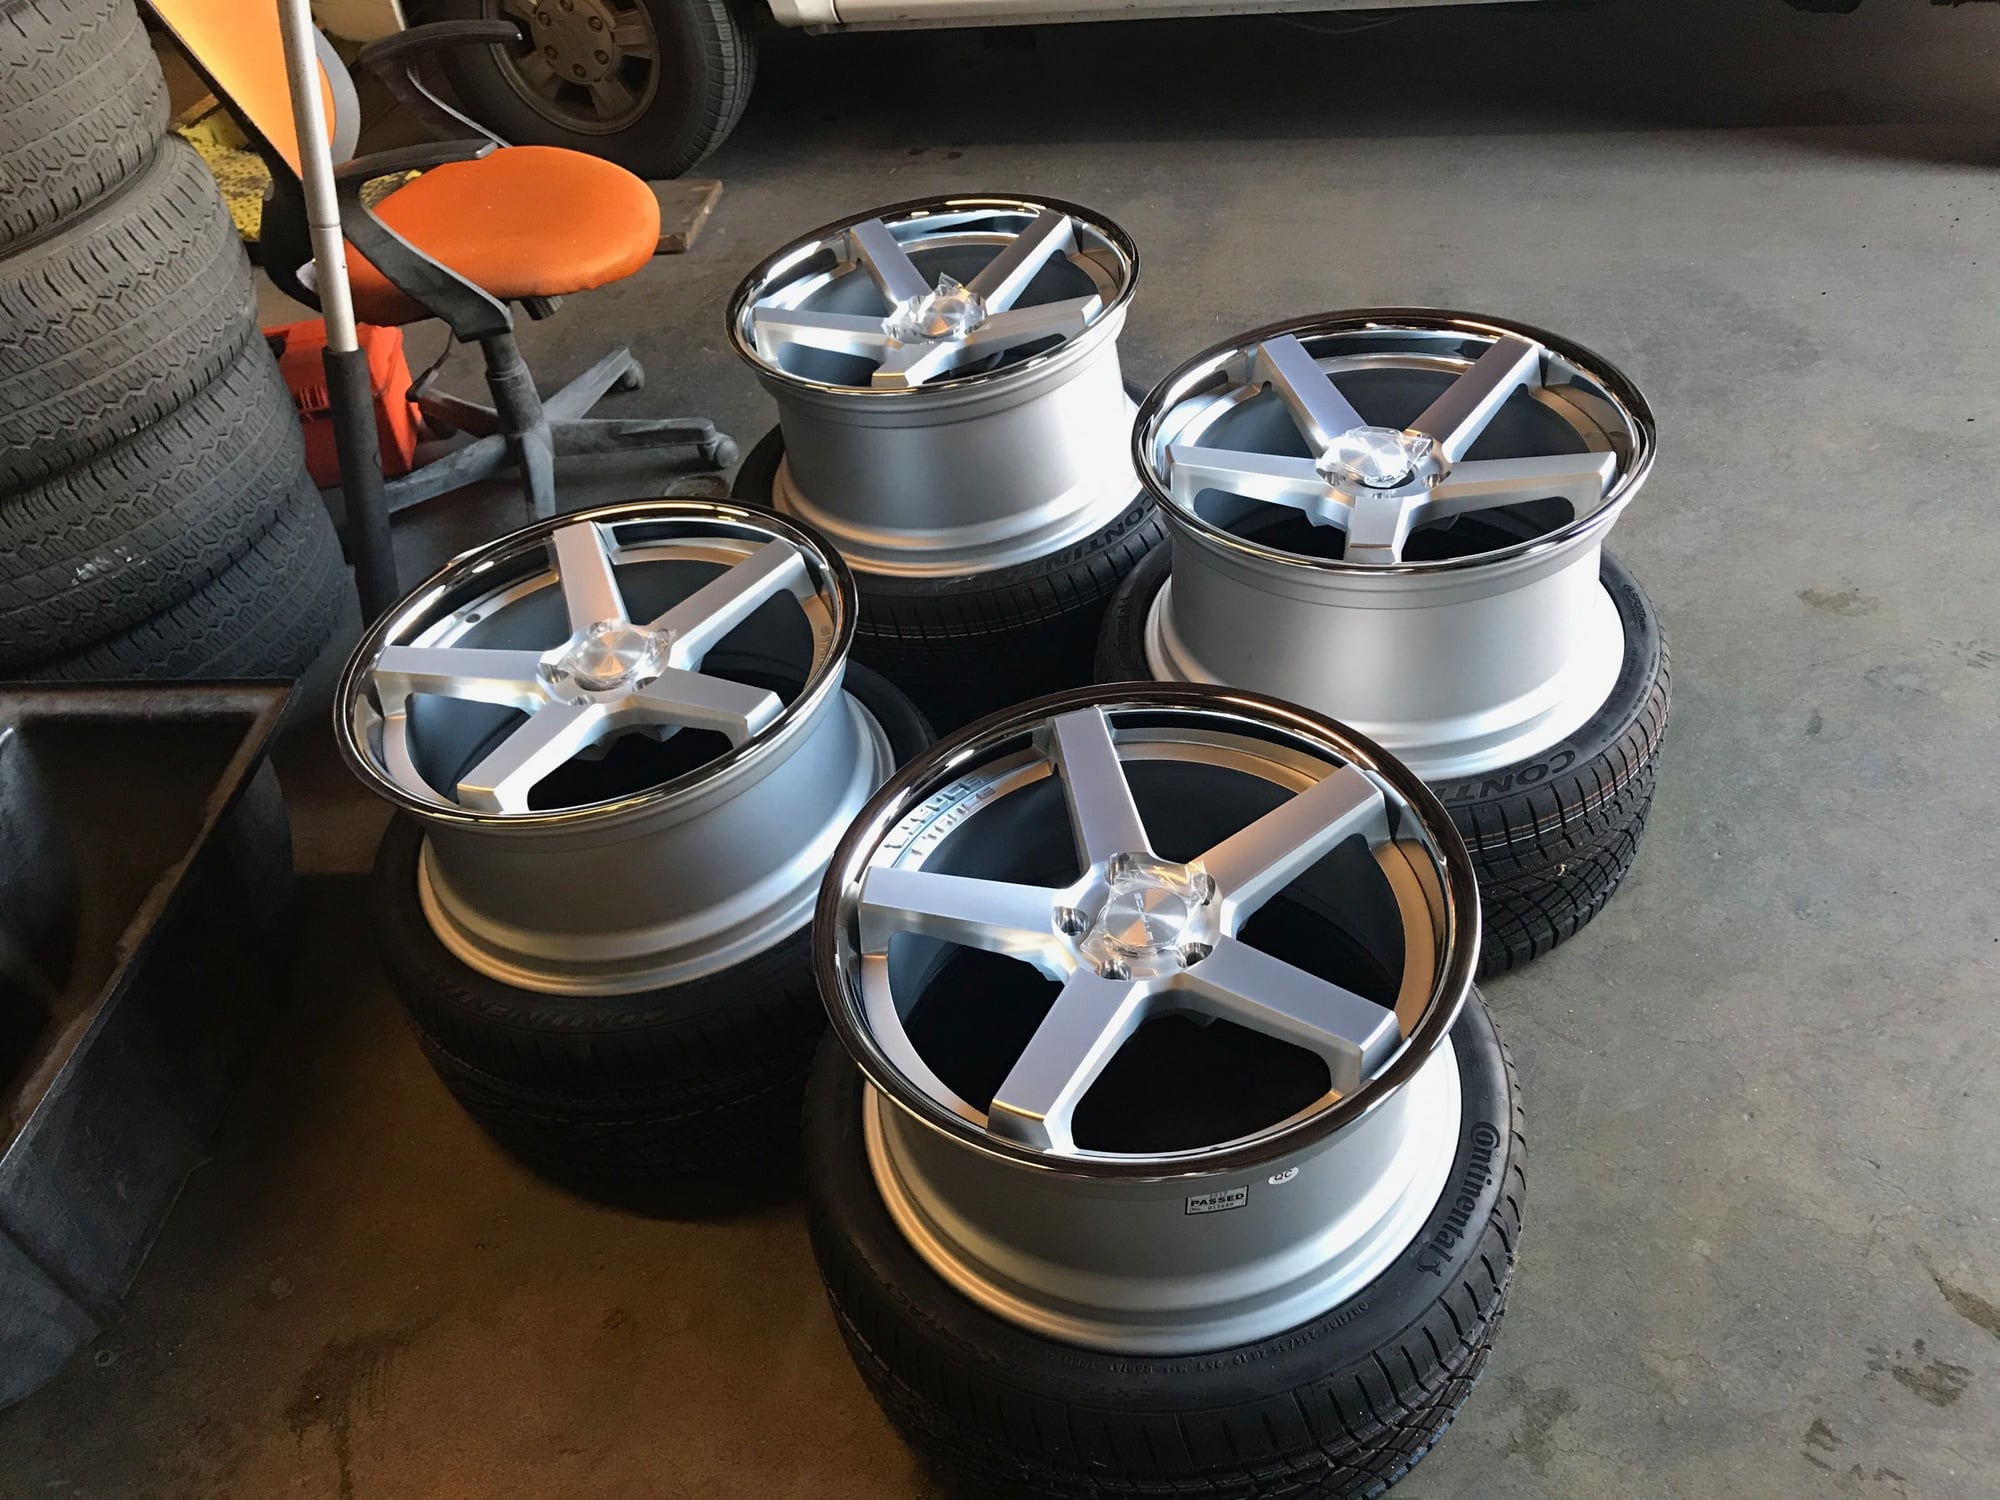 Wheels and Tires/Axles - 19s STANCE SC5 W/ CONTI DSW - Used - 2003 to 2006 Mercedes-Benz E55 AMG - New Haven, CT 06513, United States